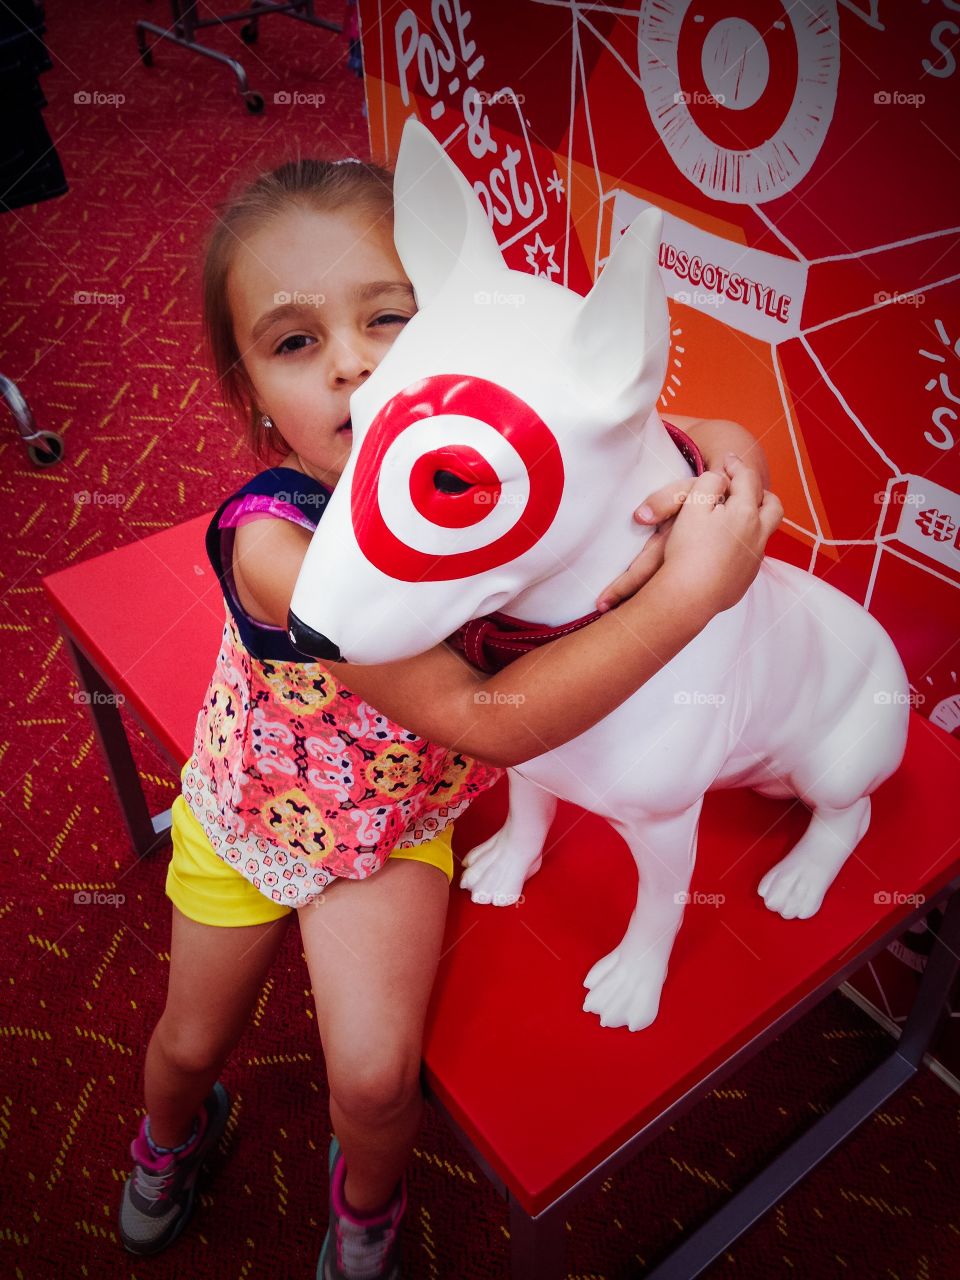 My daughter wanted a pic with the Target dog.